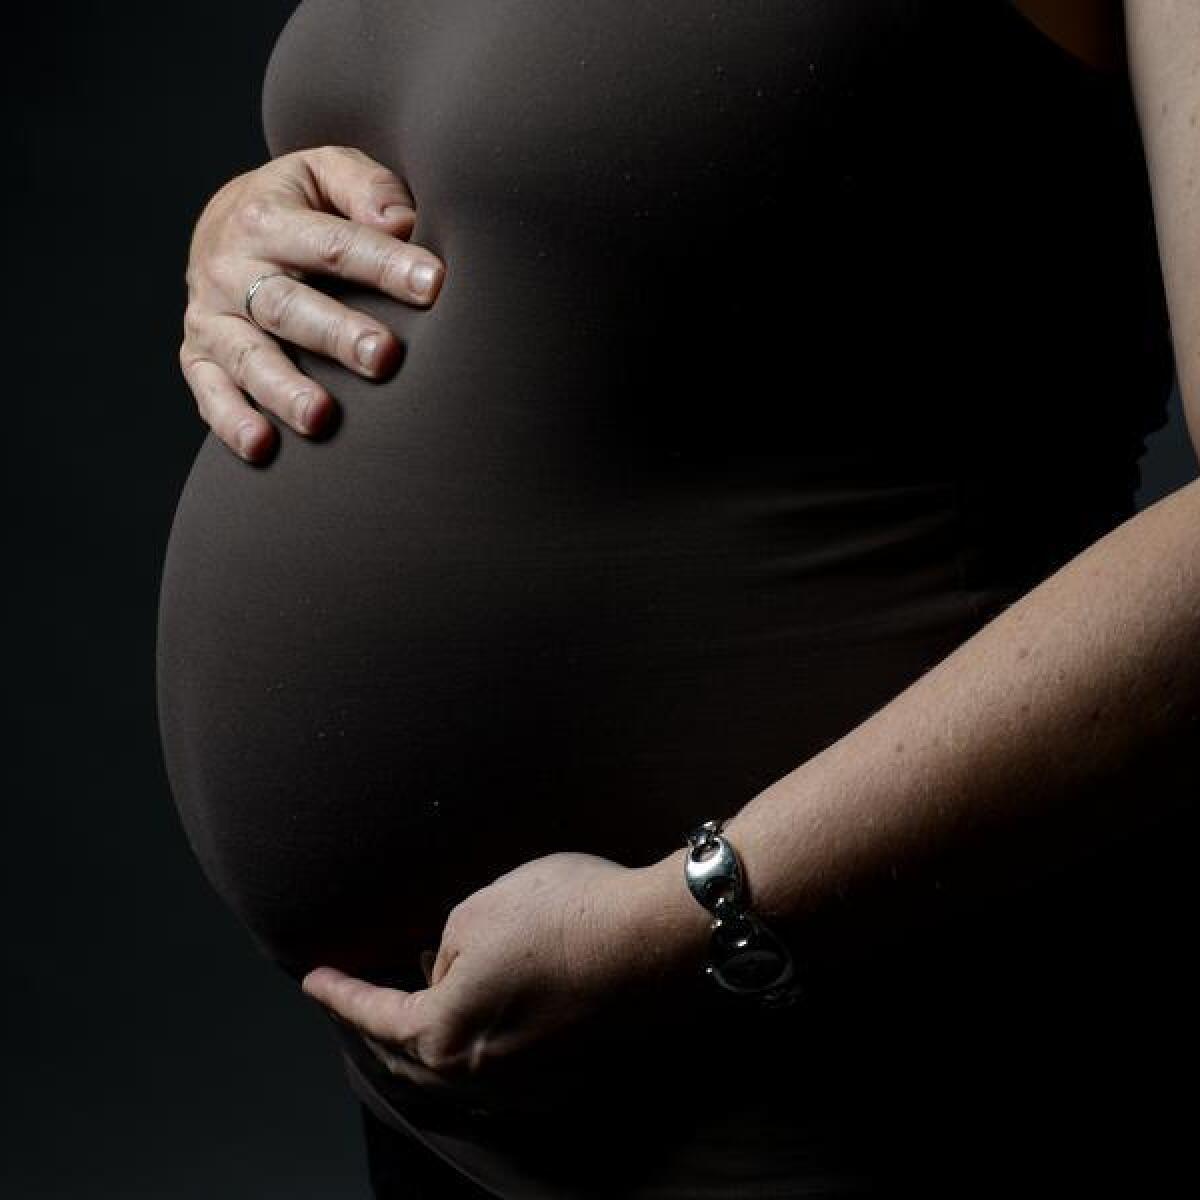 Generic picture of a pregnant woman.